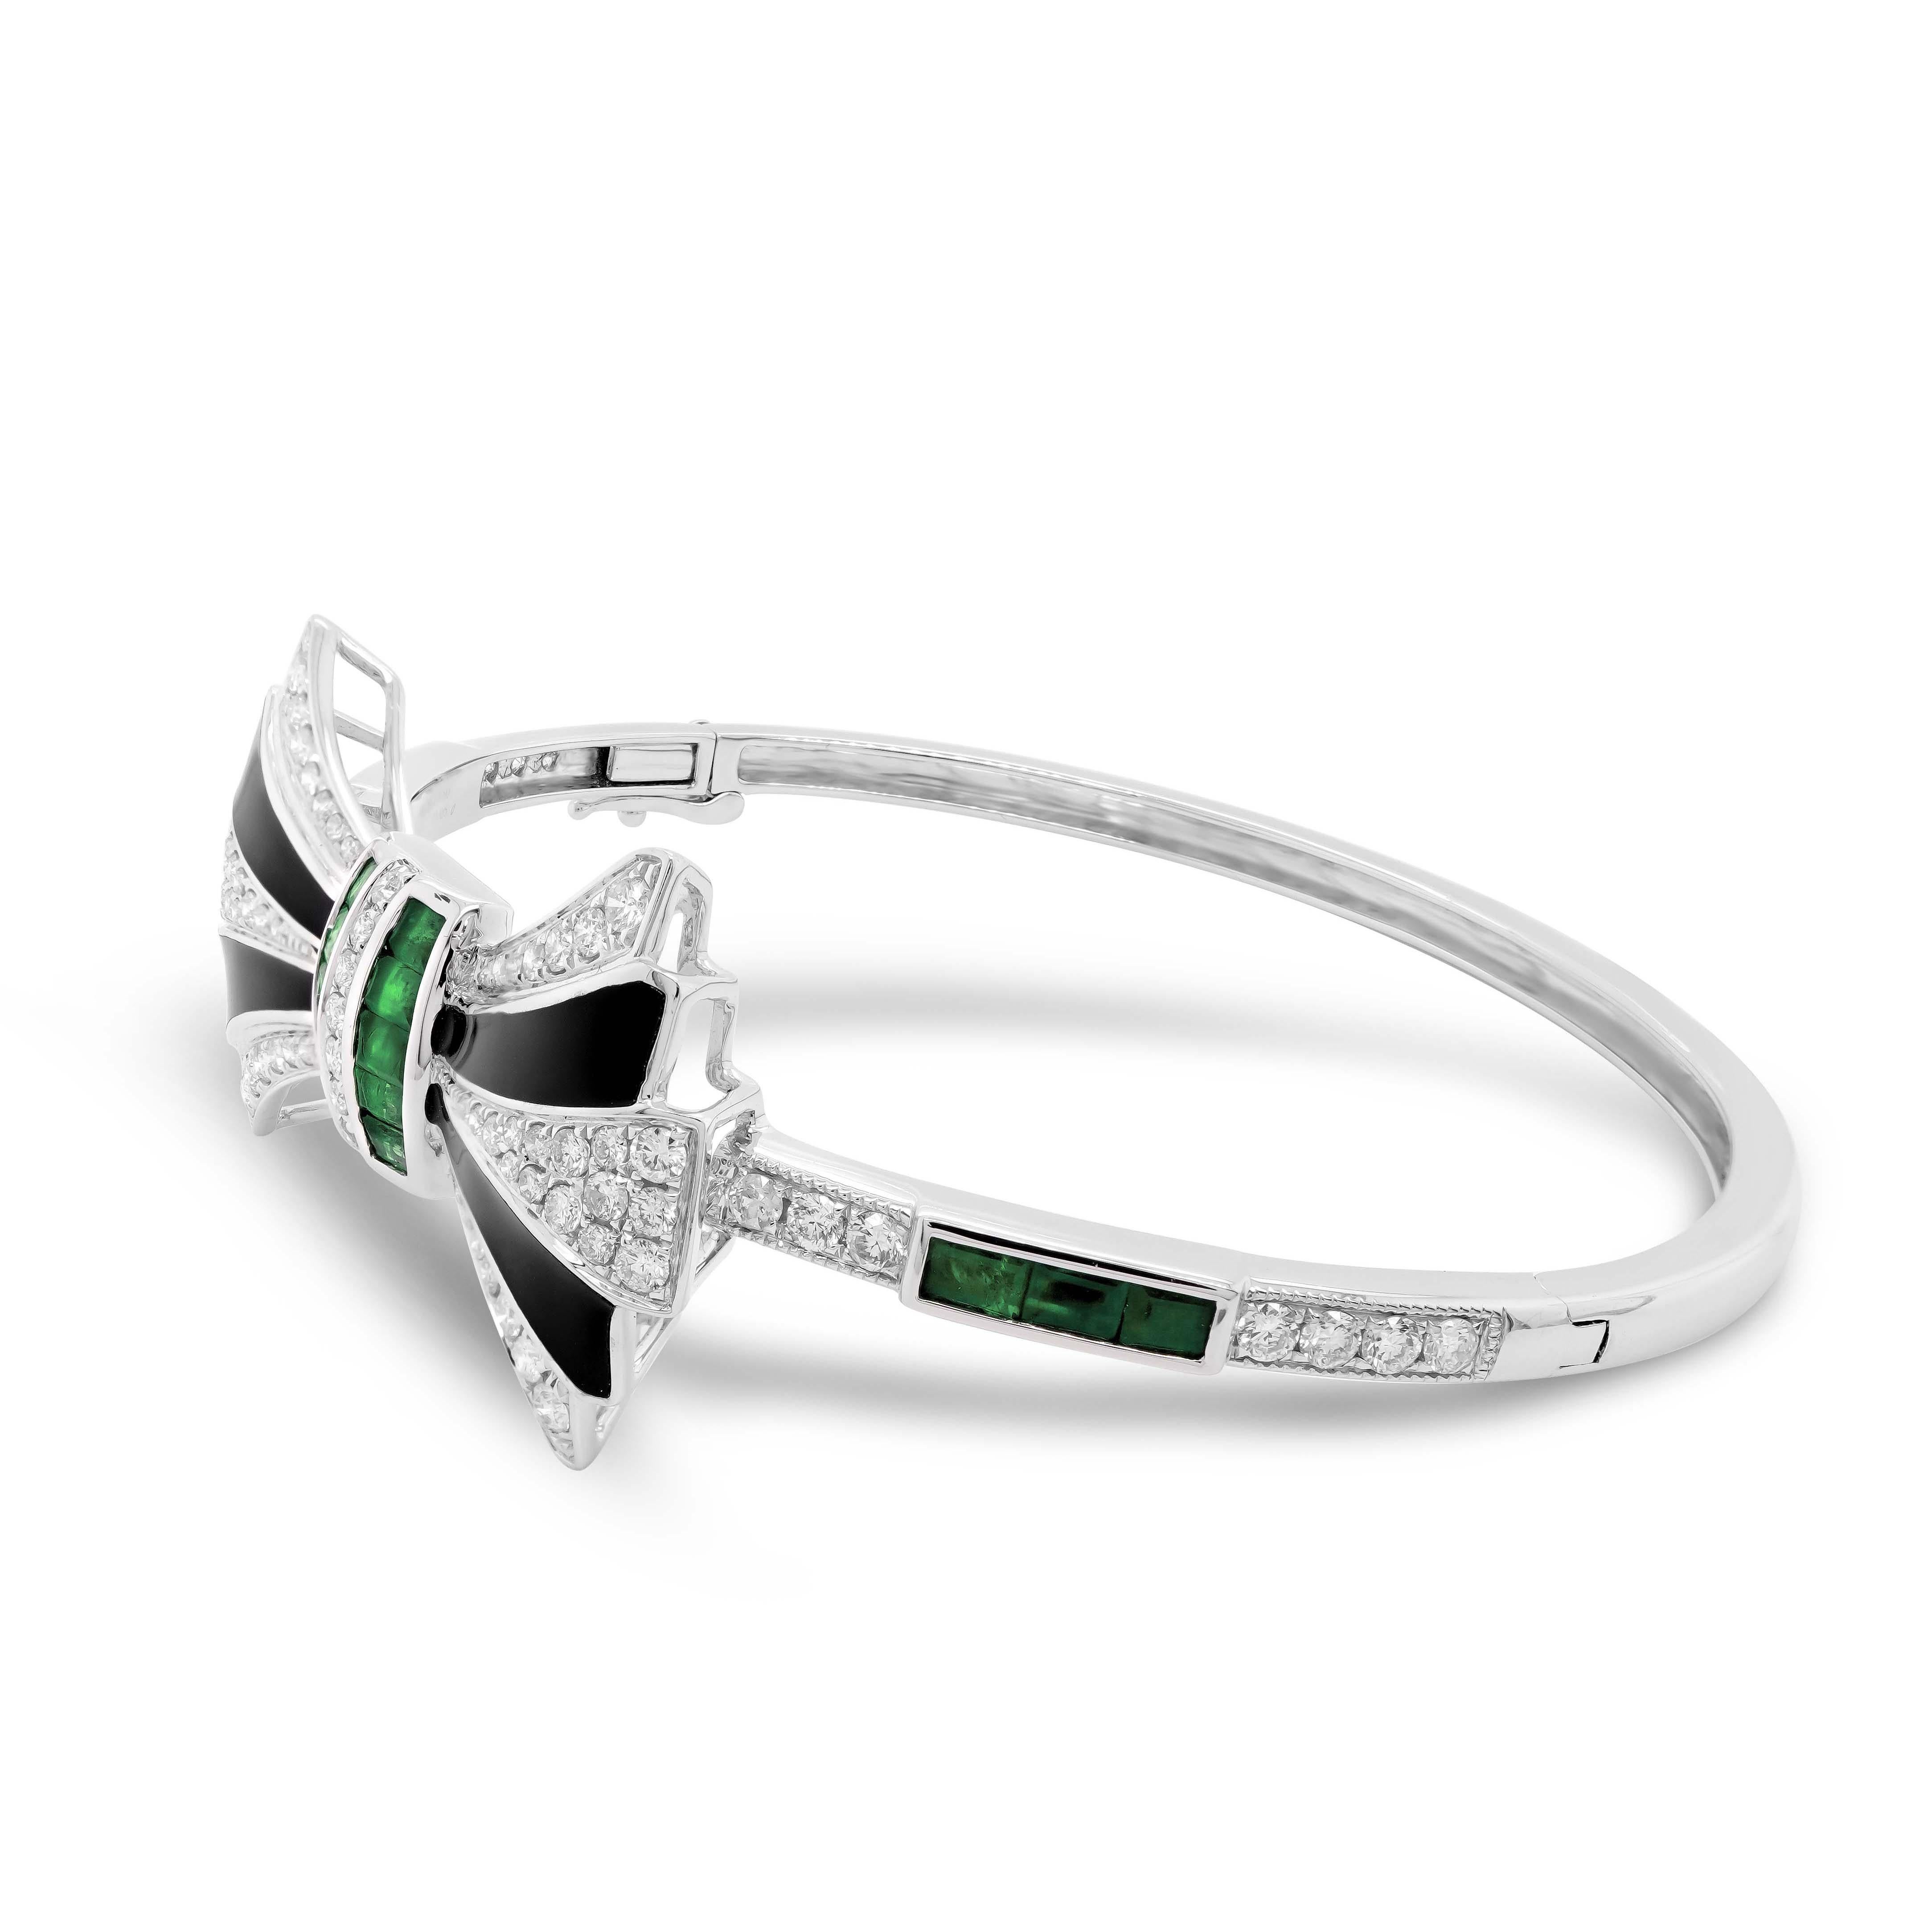 This beautiful statement bangle comprises 4pcs of irregular cut, 0.55ct black onyx stones from Tucson America, and 16pcs of baguette emeralds from Zambia. The bangle is complimented well with 83 brilliant white diamonds, adding an extra touch of